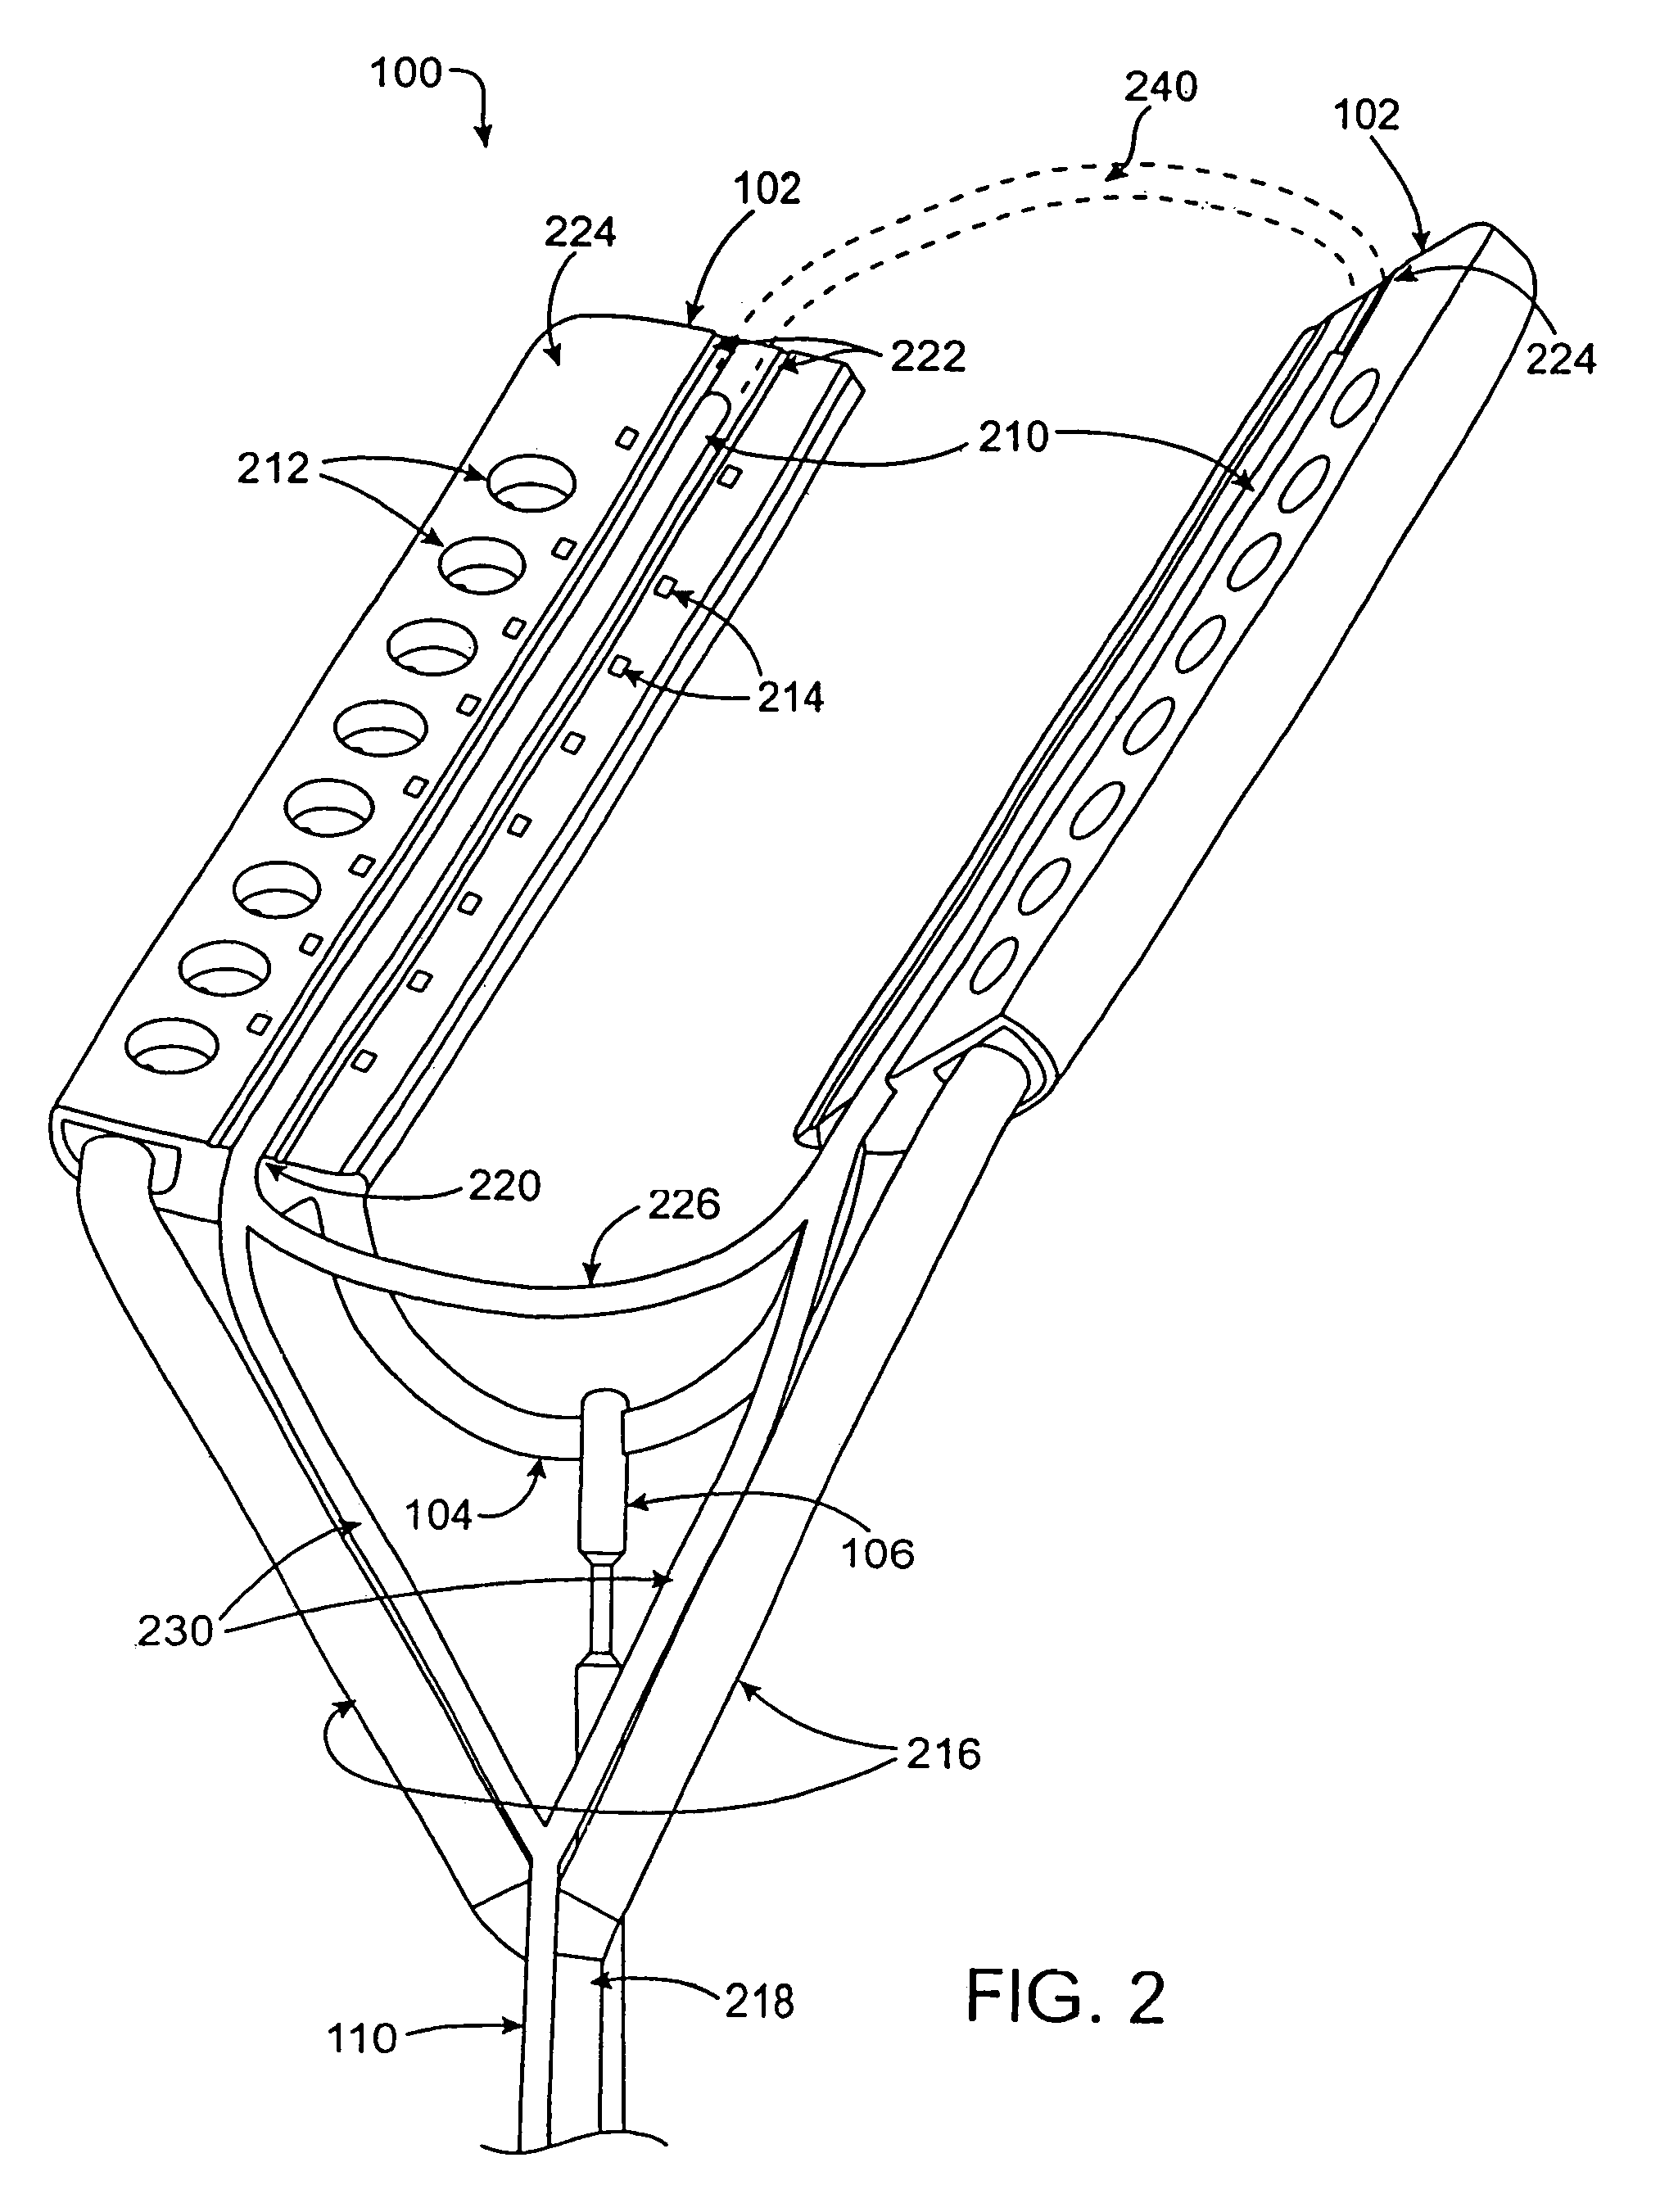 Cardiac ablation devices and methods